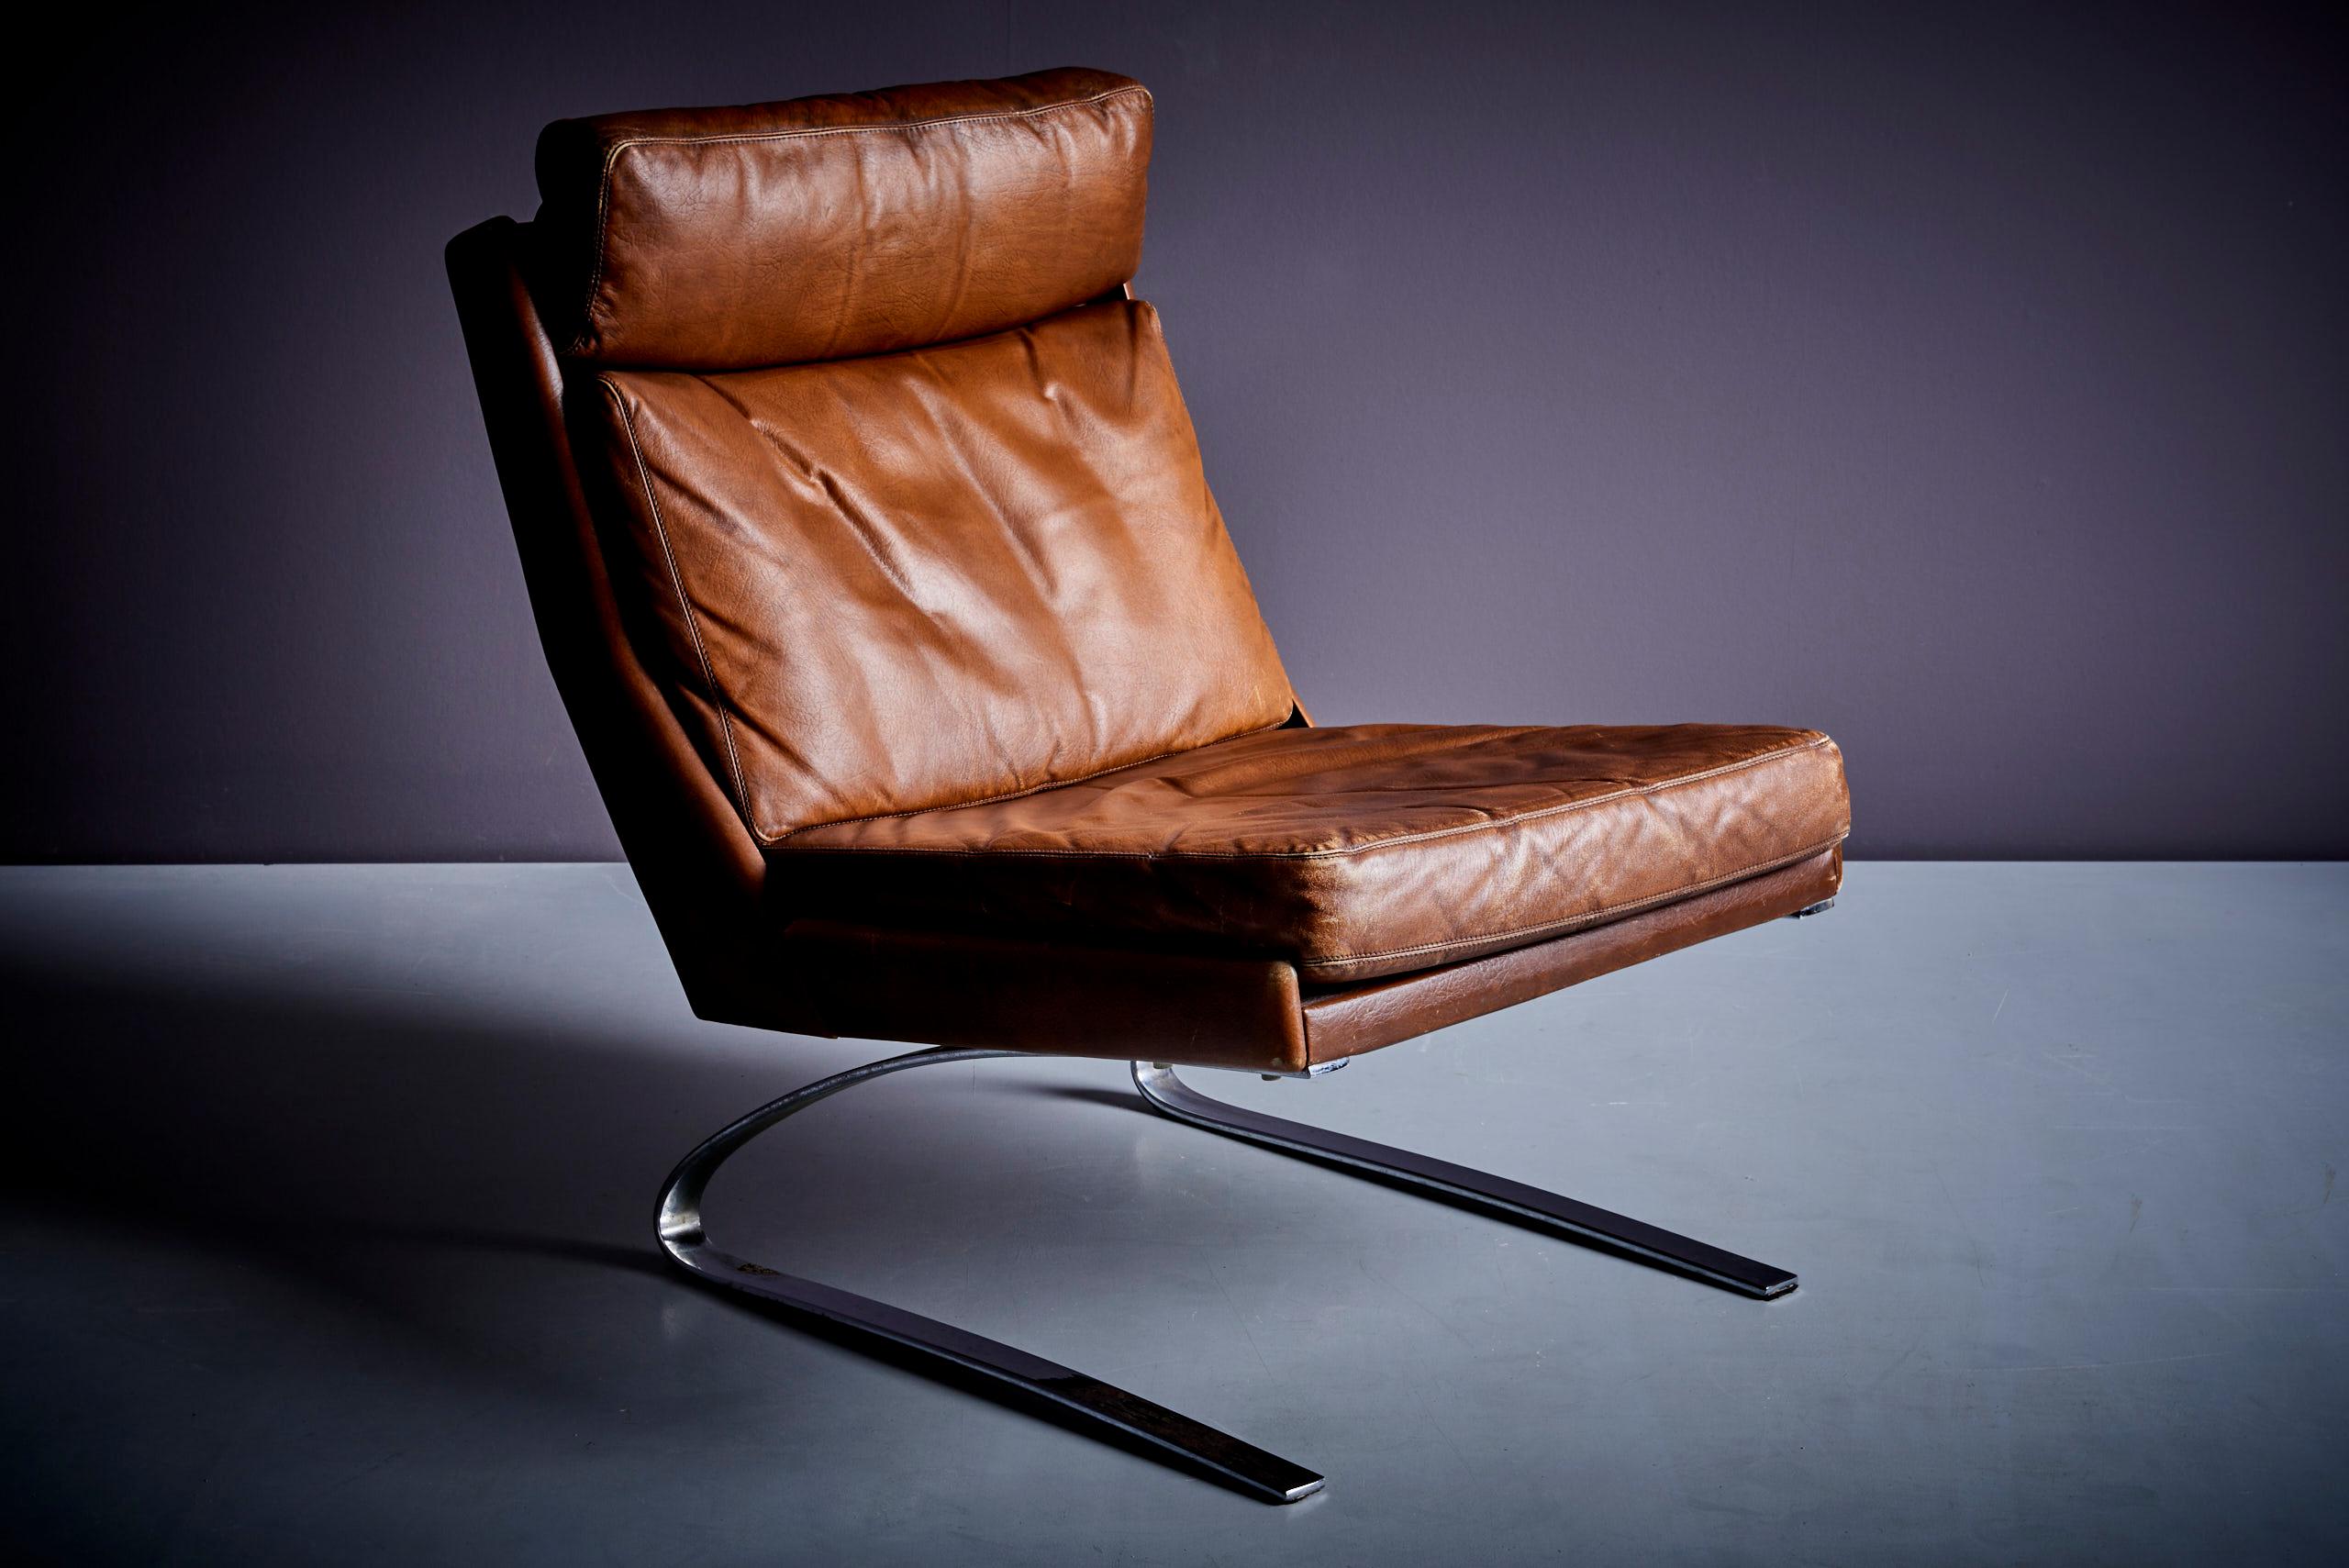 Swing Slipper Brown Leather Lounge Chair by Reinhold Adolf for Cor, 1960s For Sale 3